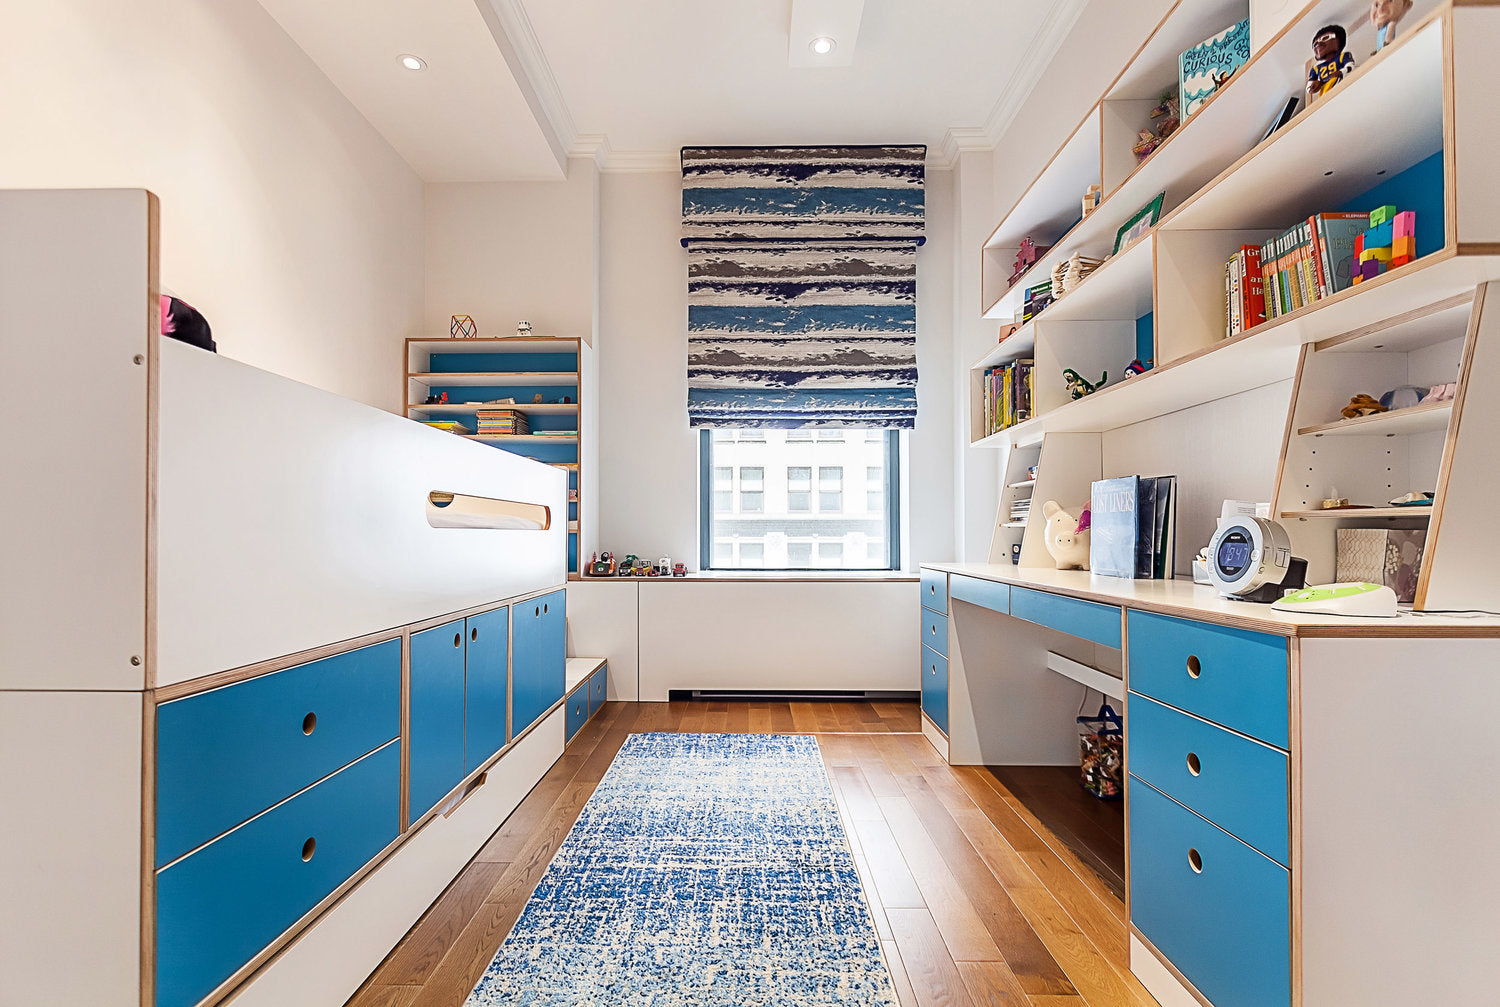 Modern child’s room with blue beds, white shelves, and patterned rug.